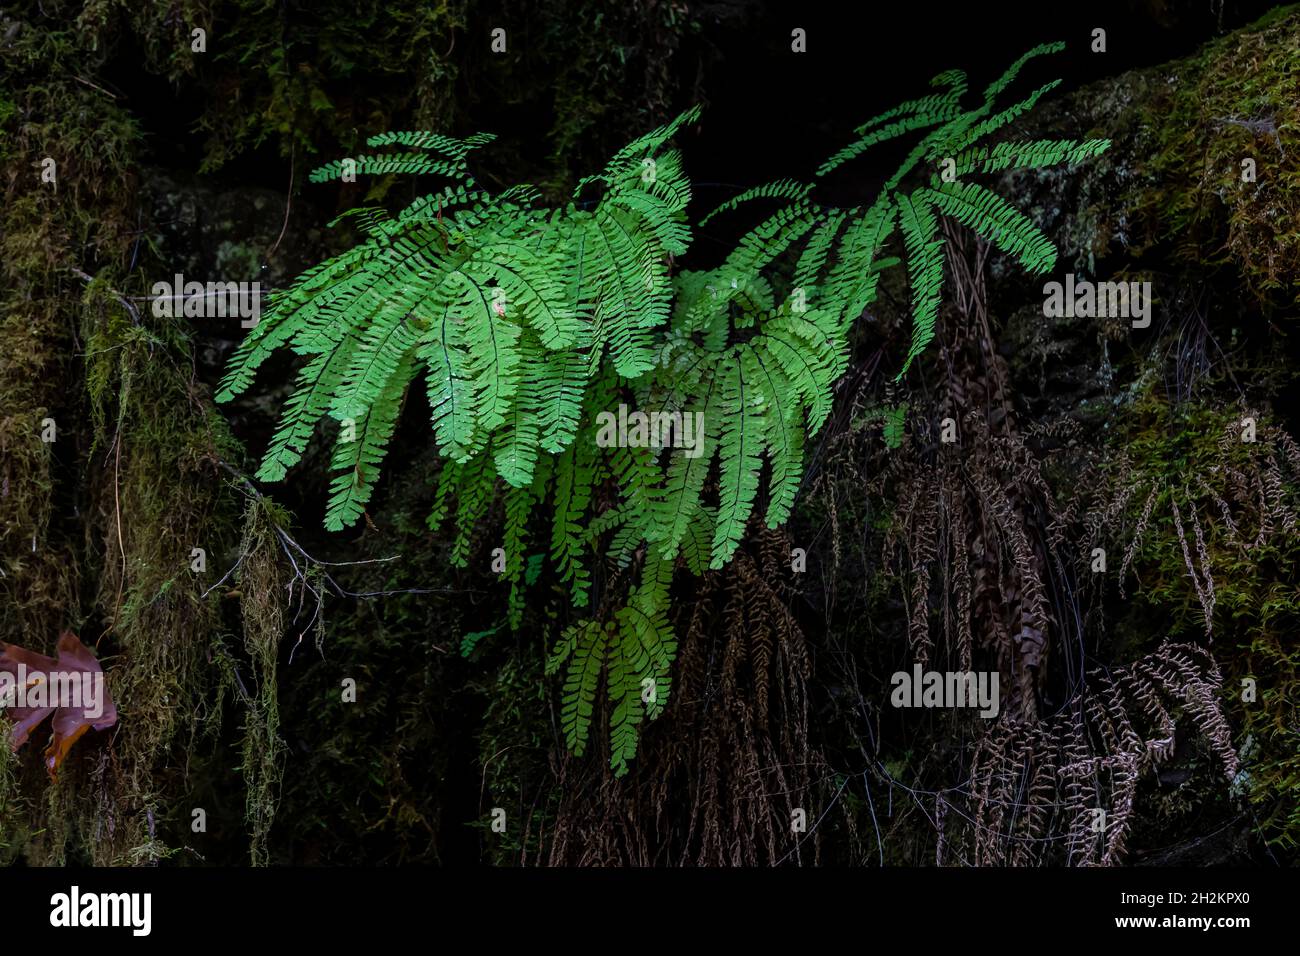 Northern Maidenhair Fern, Adiantum aleuticum, on a cliff face at Staircase, Olympic National Park, Washington State, USA Stock Photo